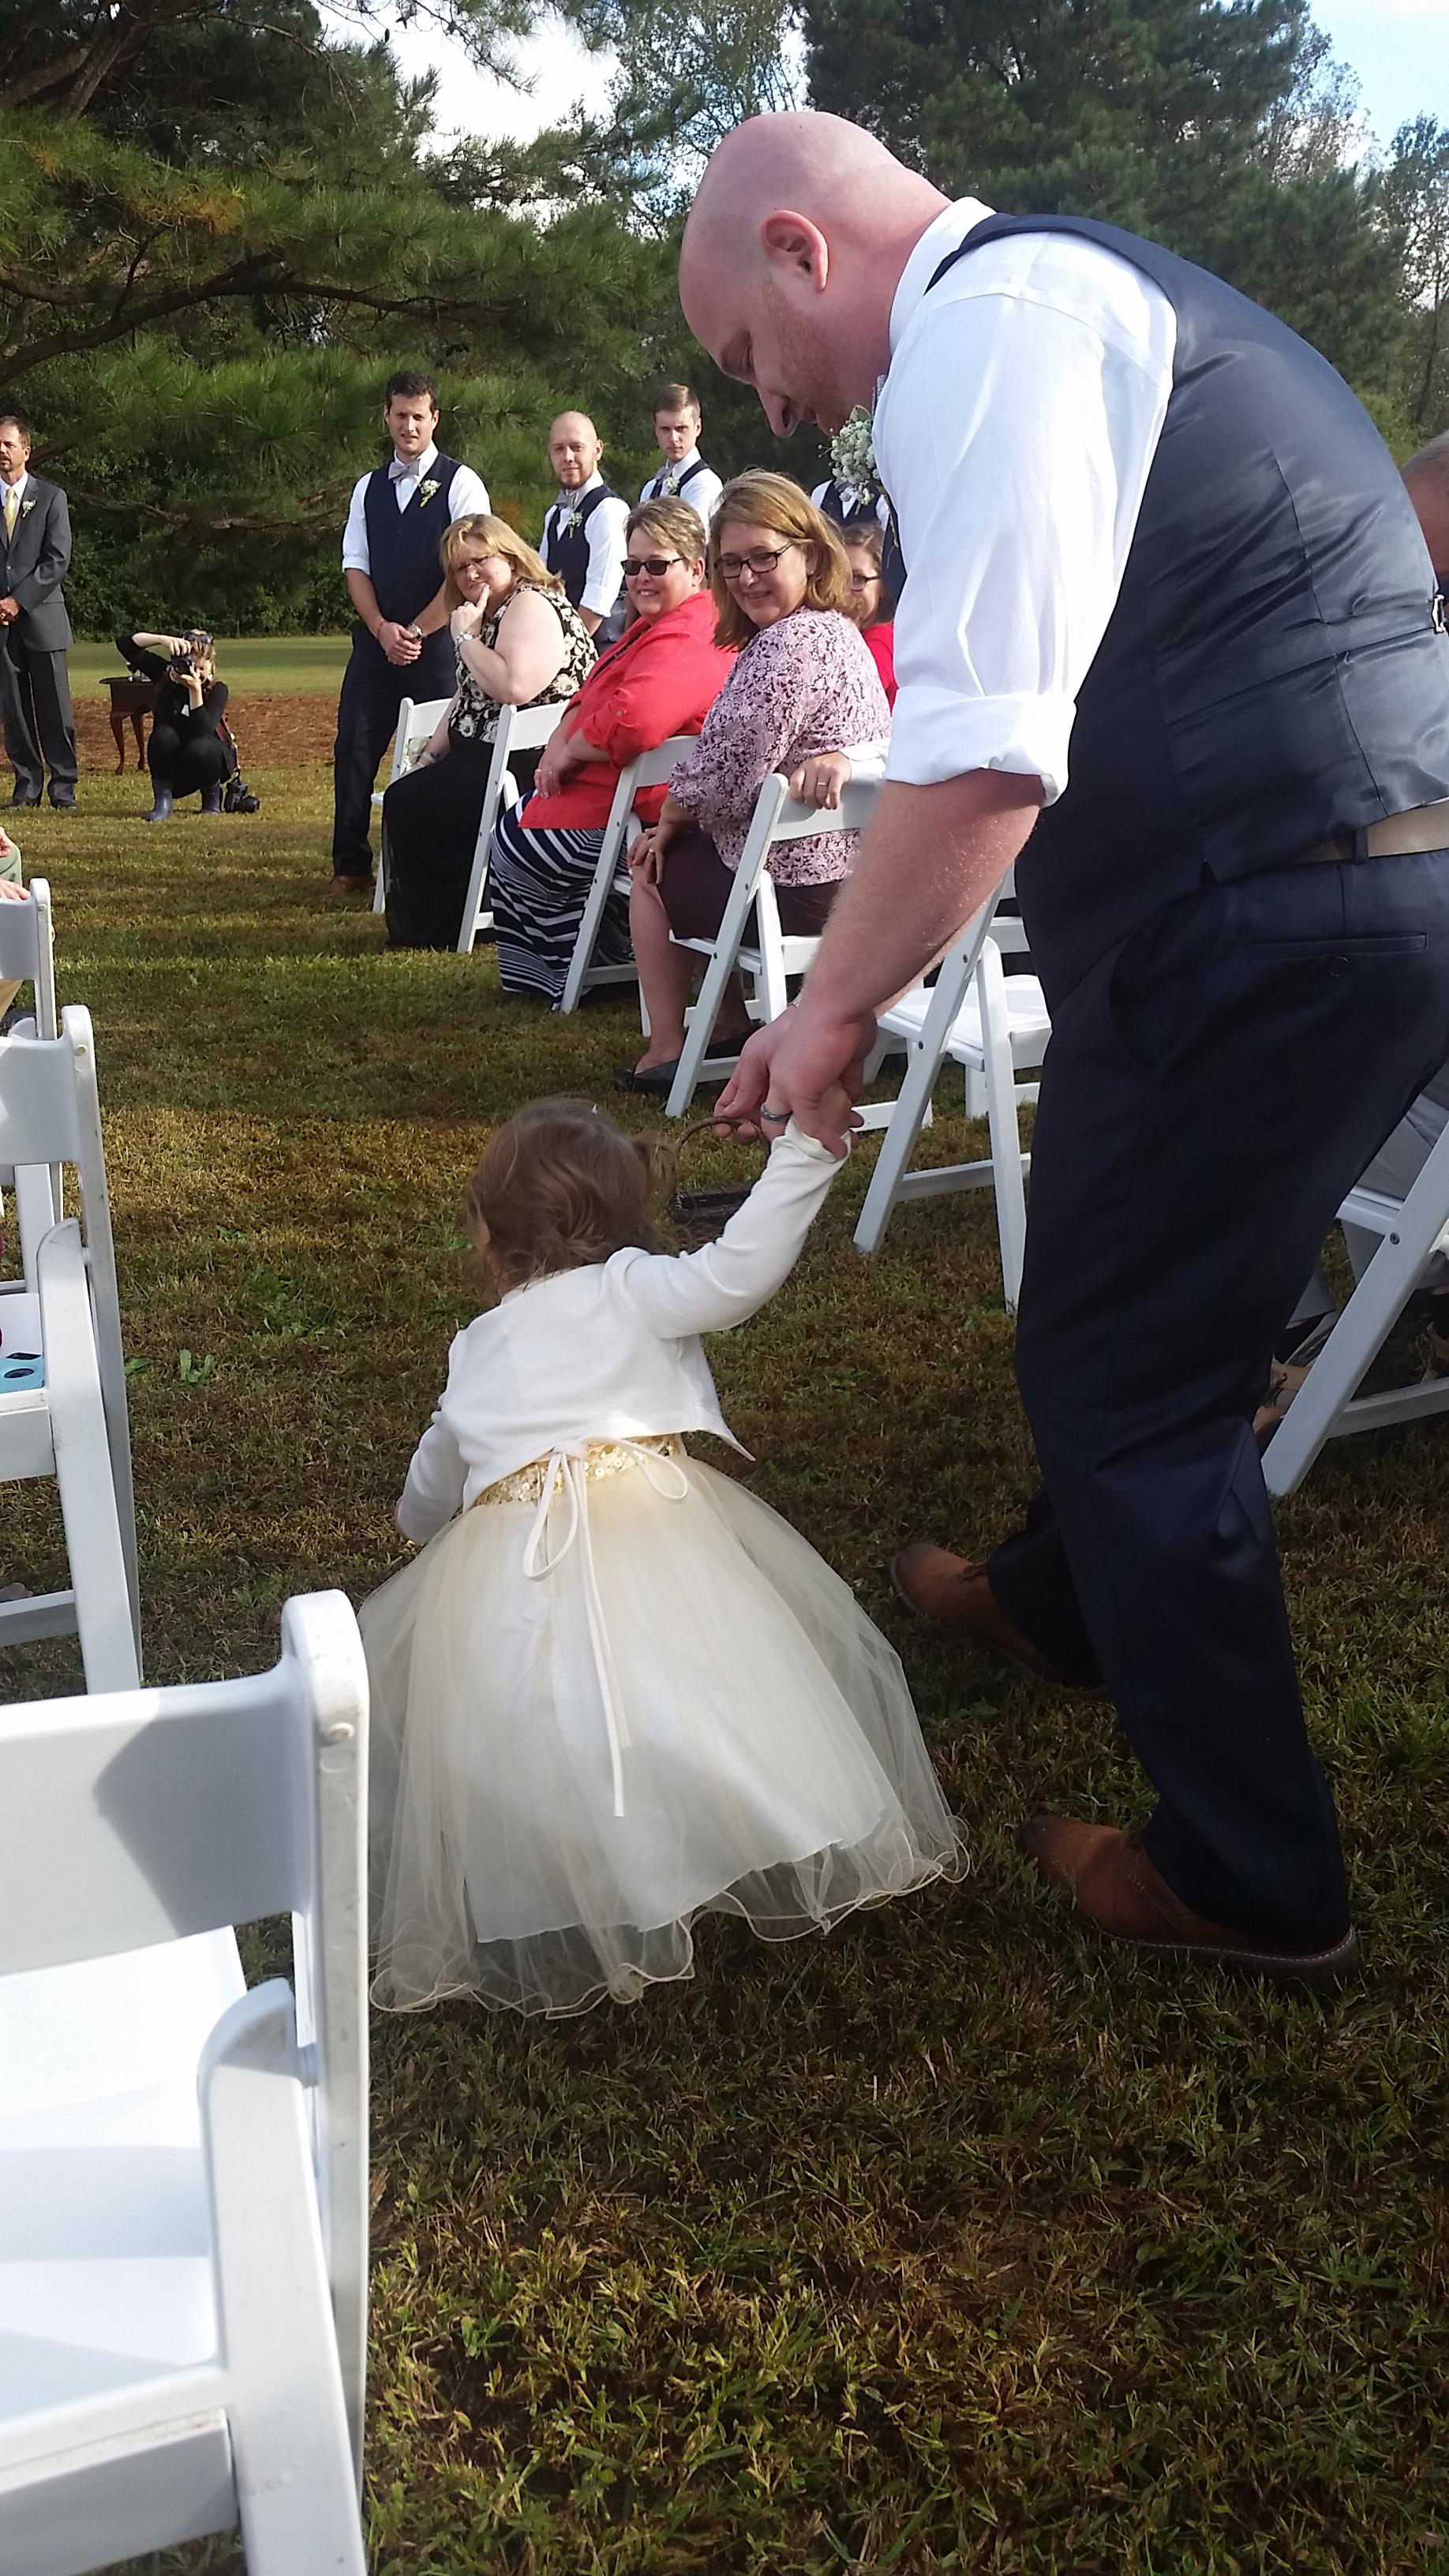 Kids Stole The Show At Weddings